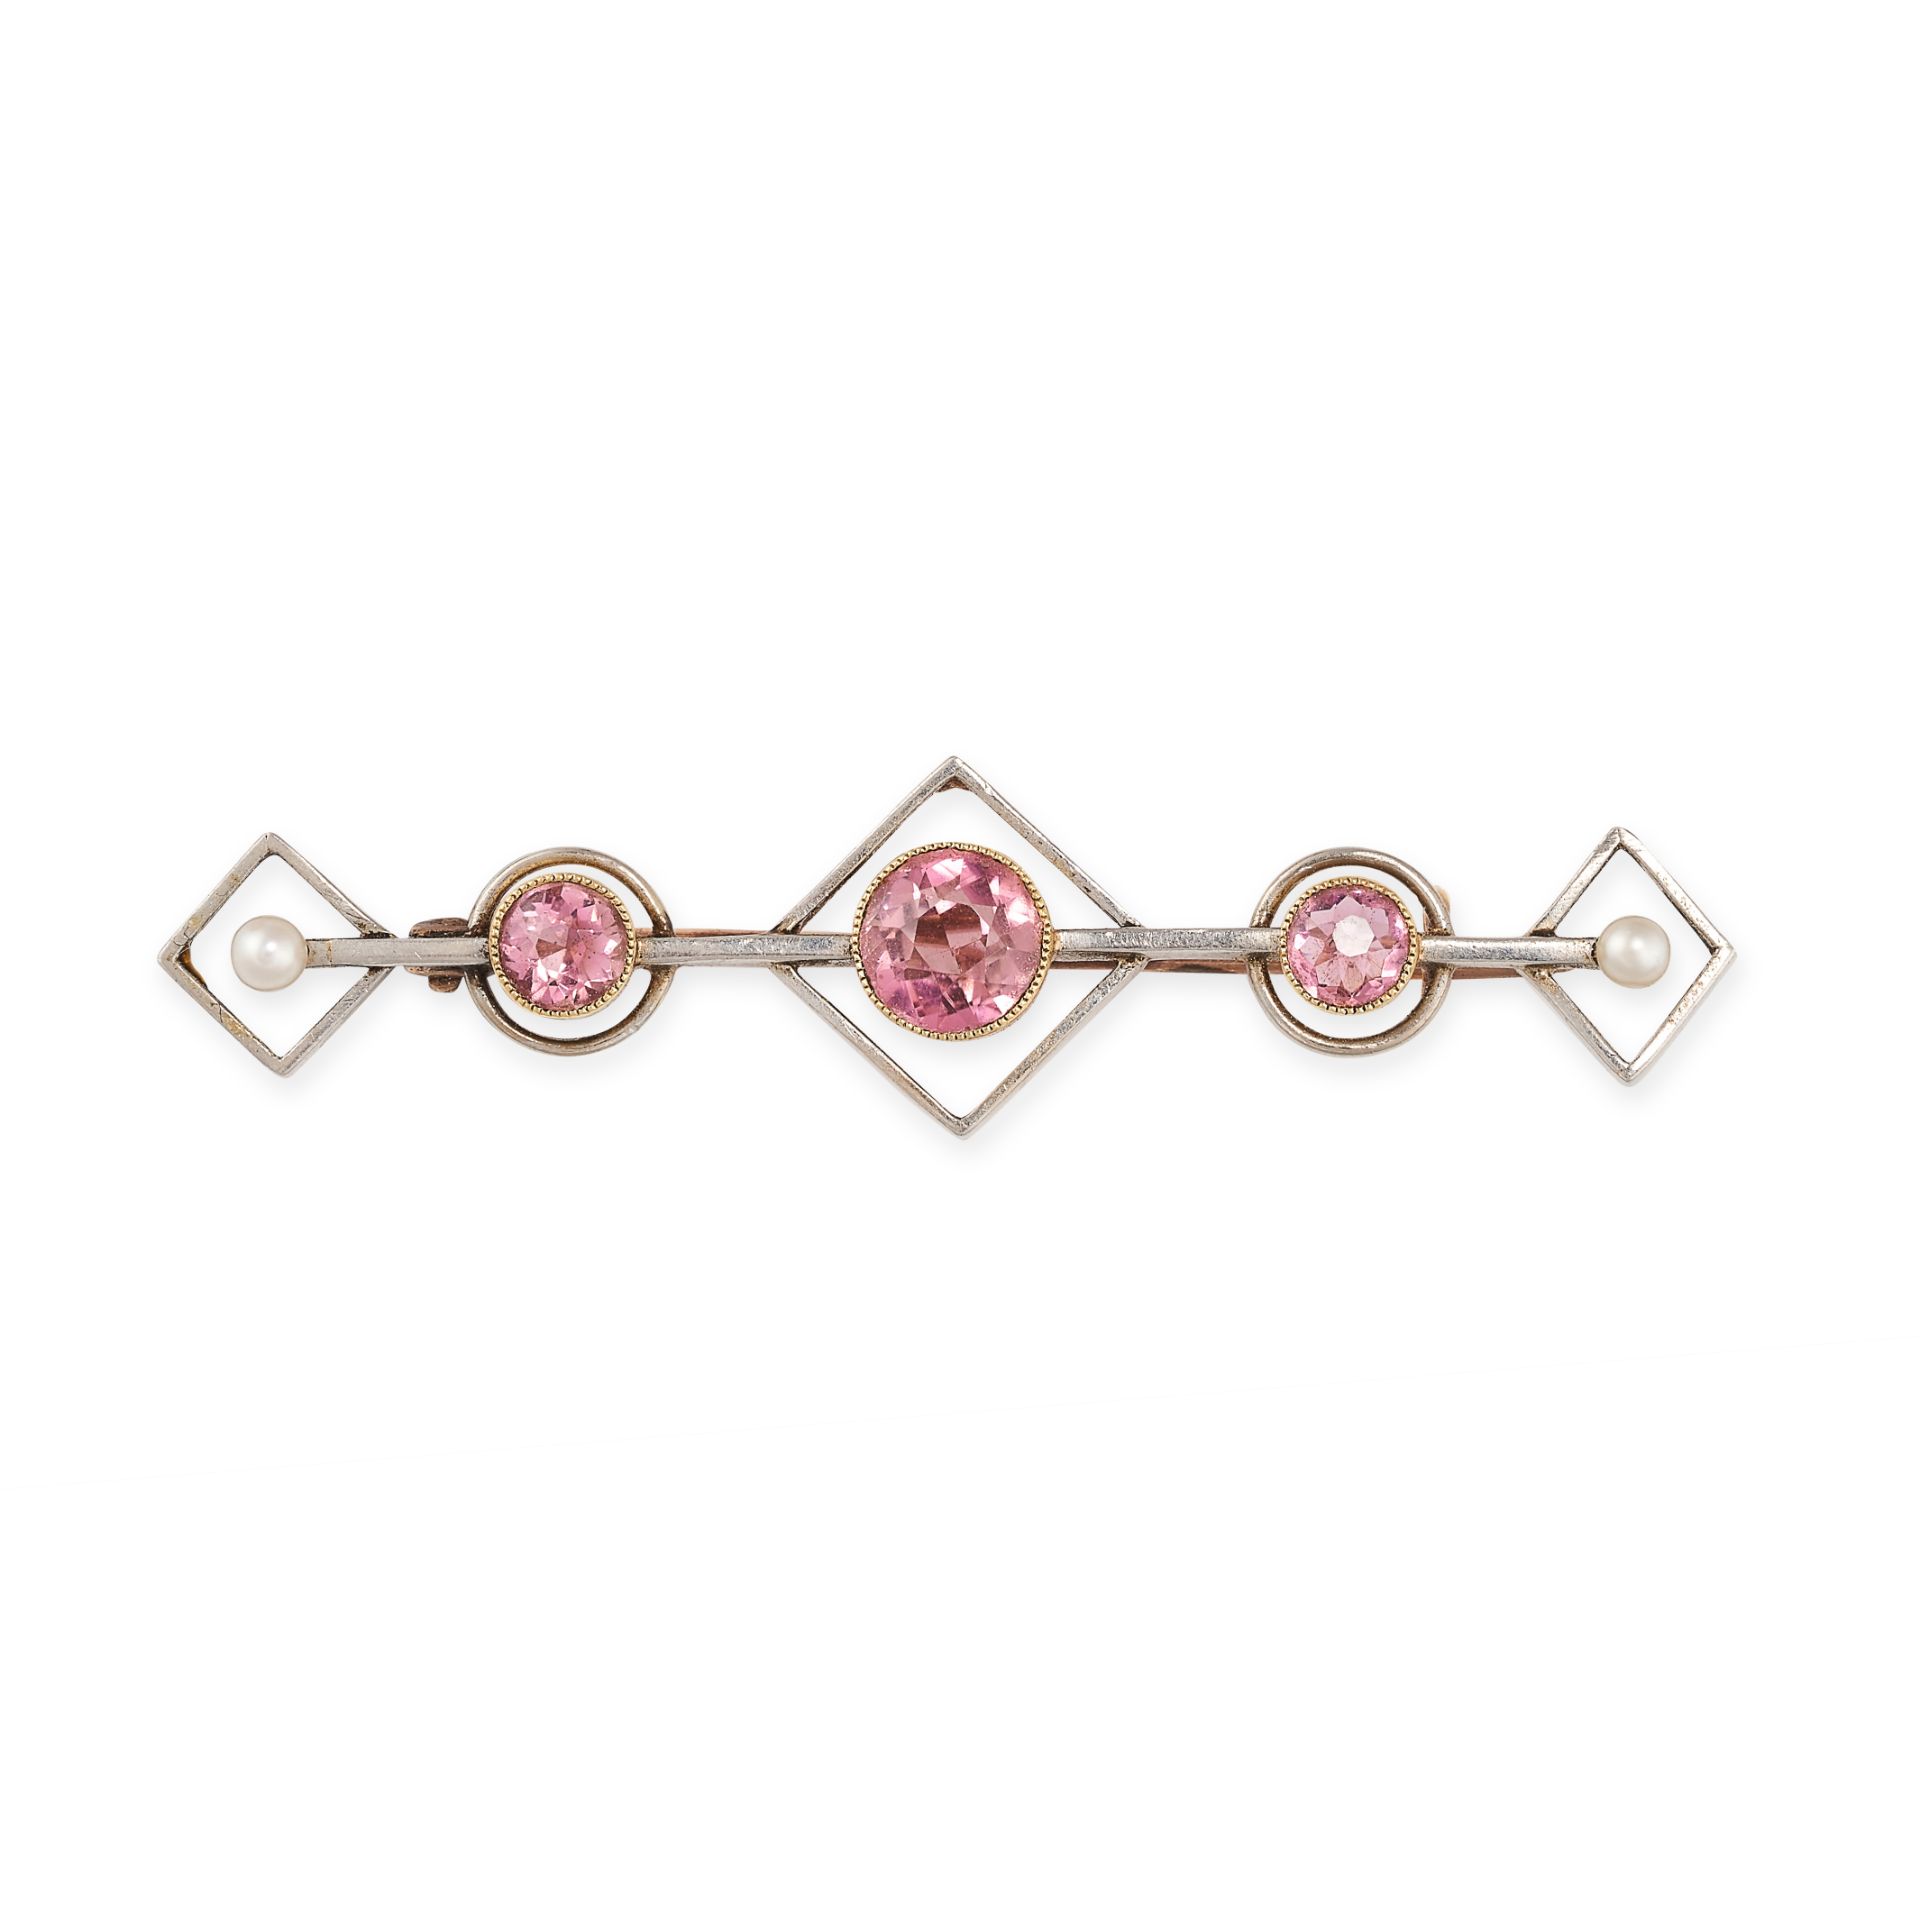 A PINK TOURMALINE AND PEARL BROOCH set with a trio of graduated round cut pink tourmaline,